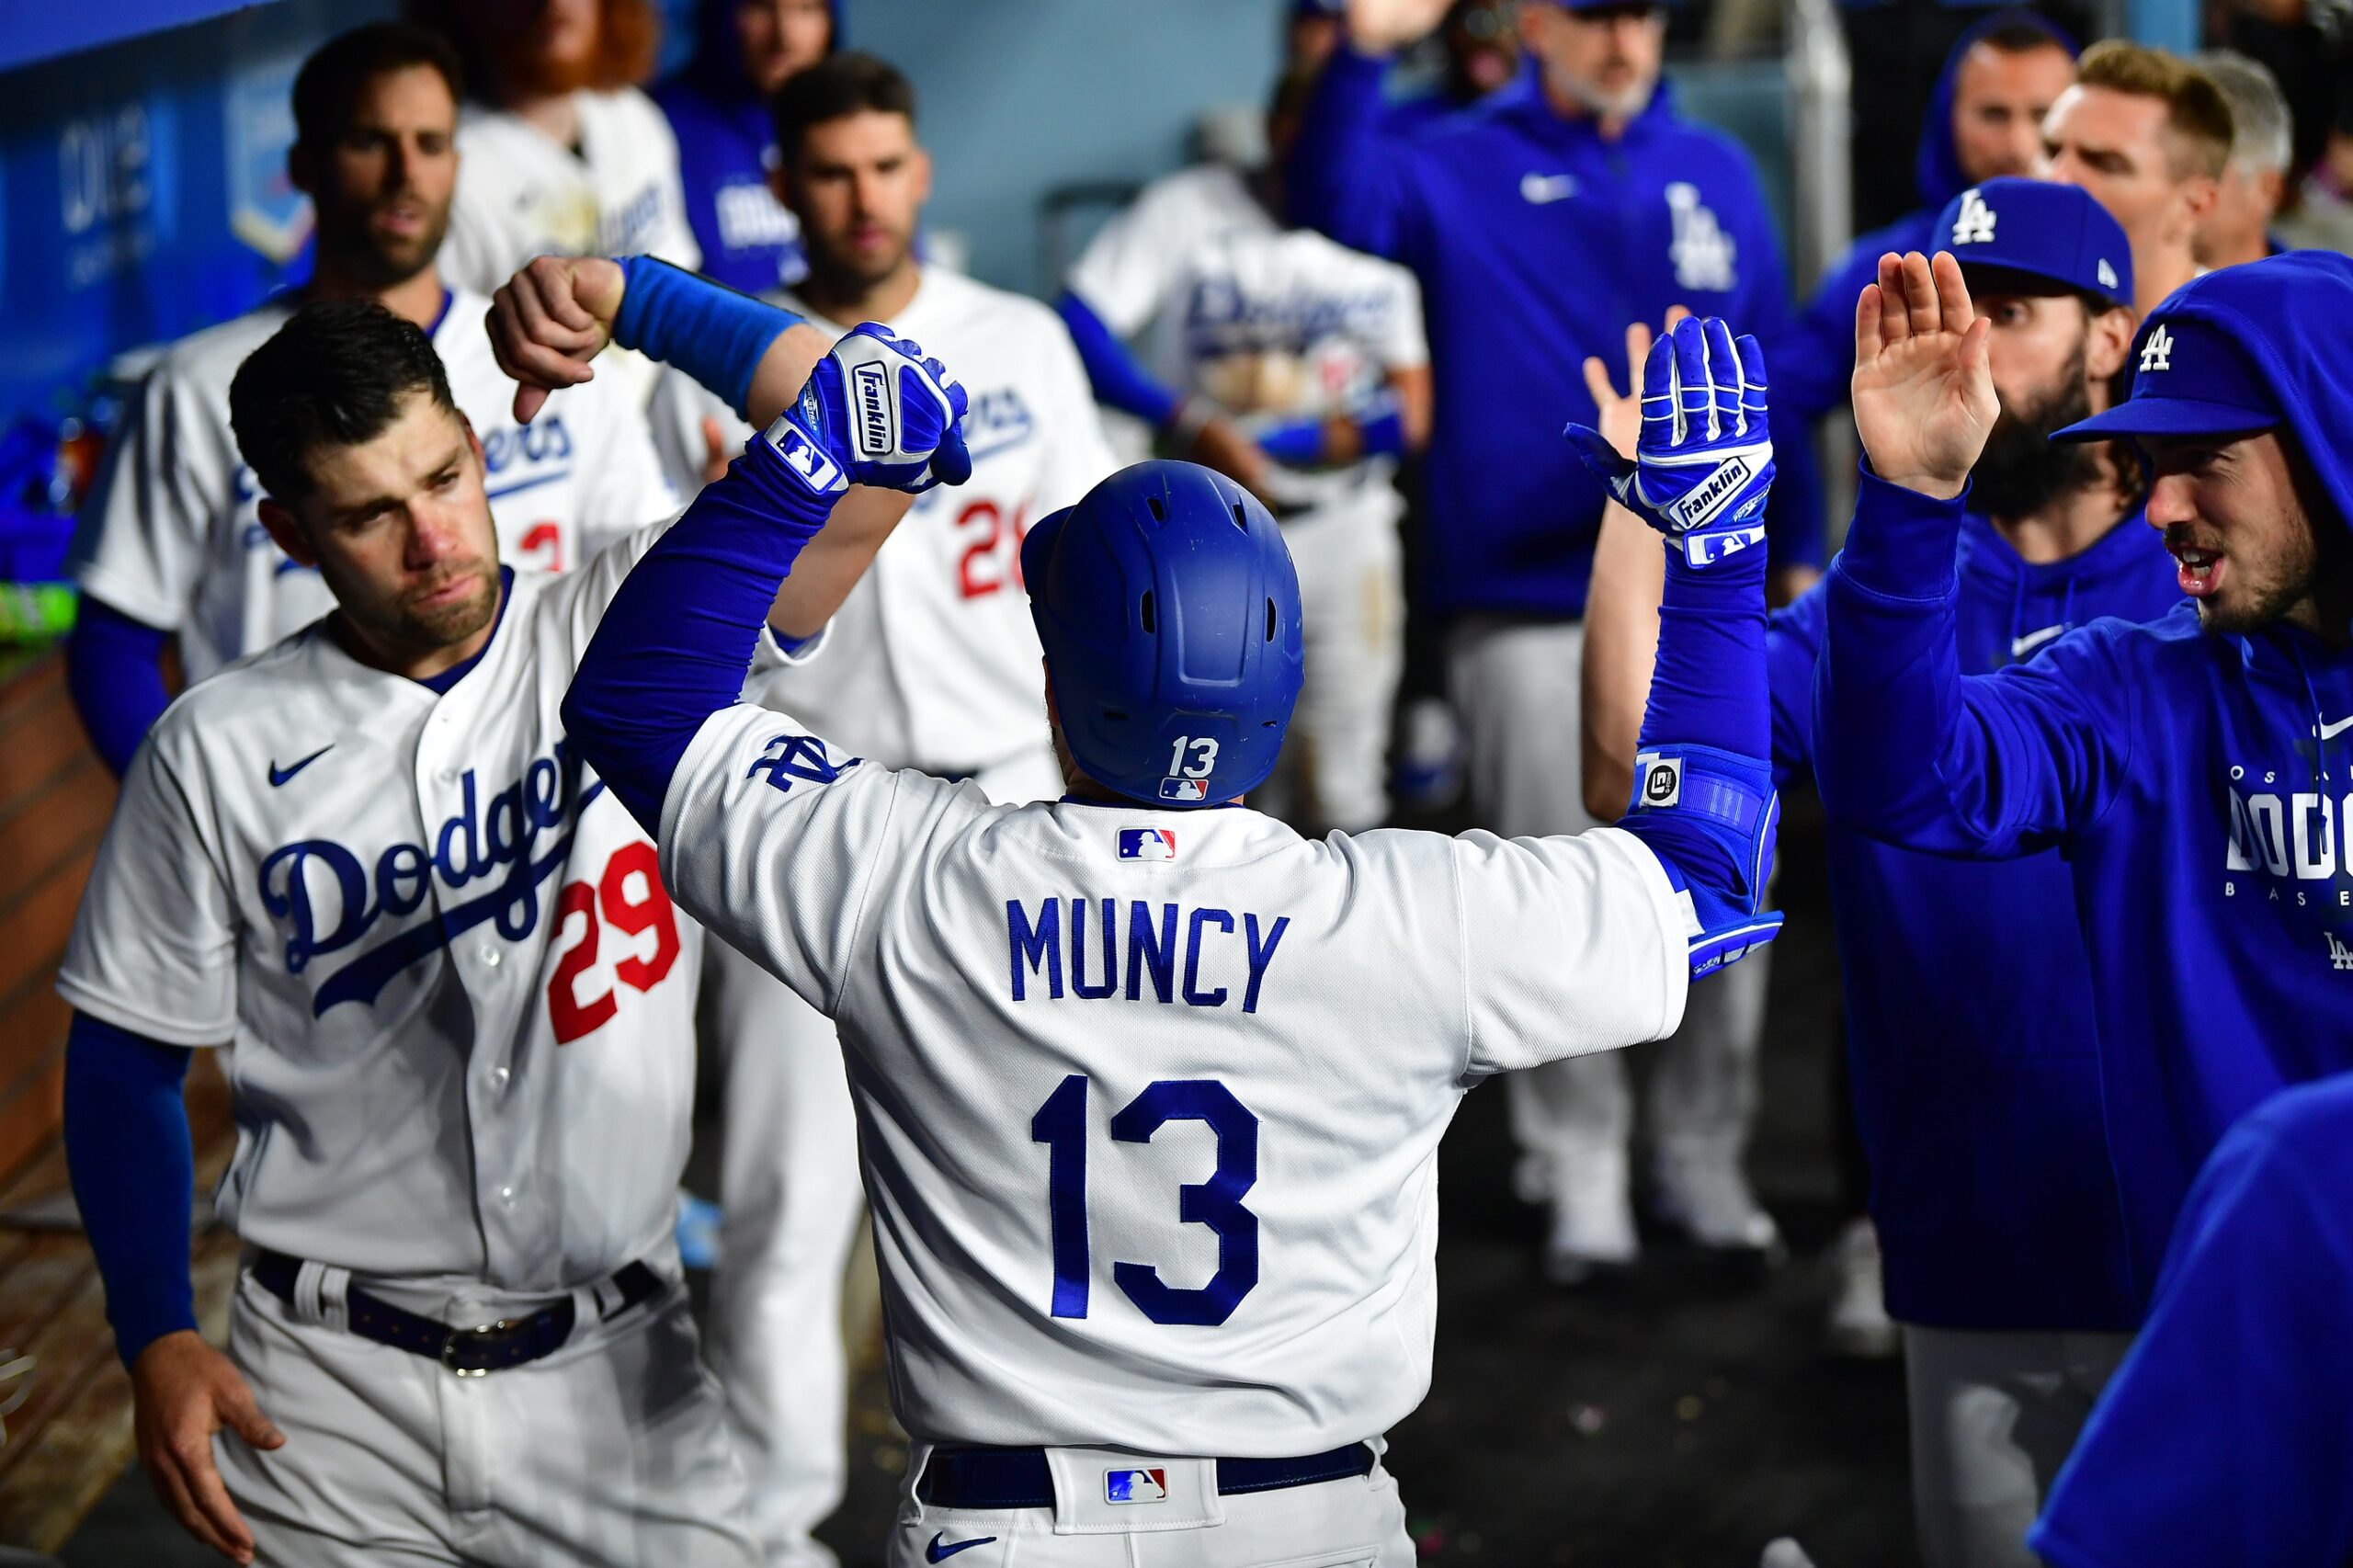 Max Muncy shared what was said in his exchange with Bumgarner